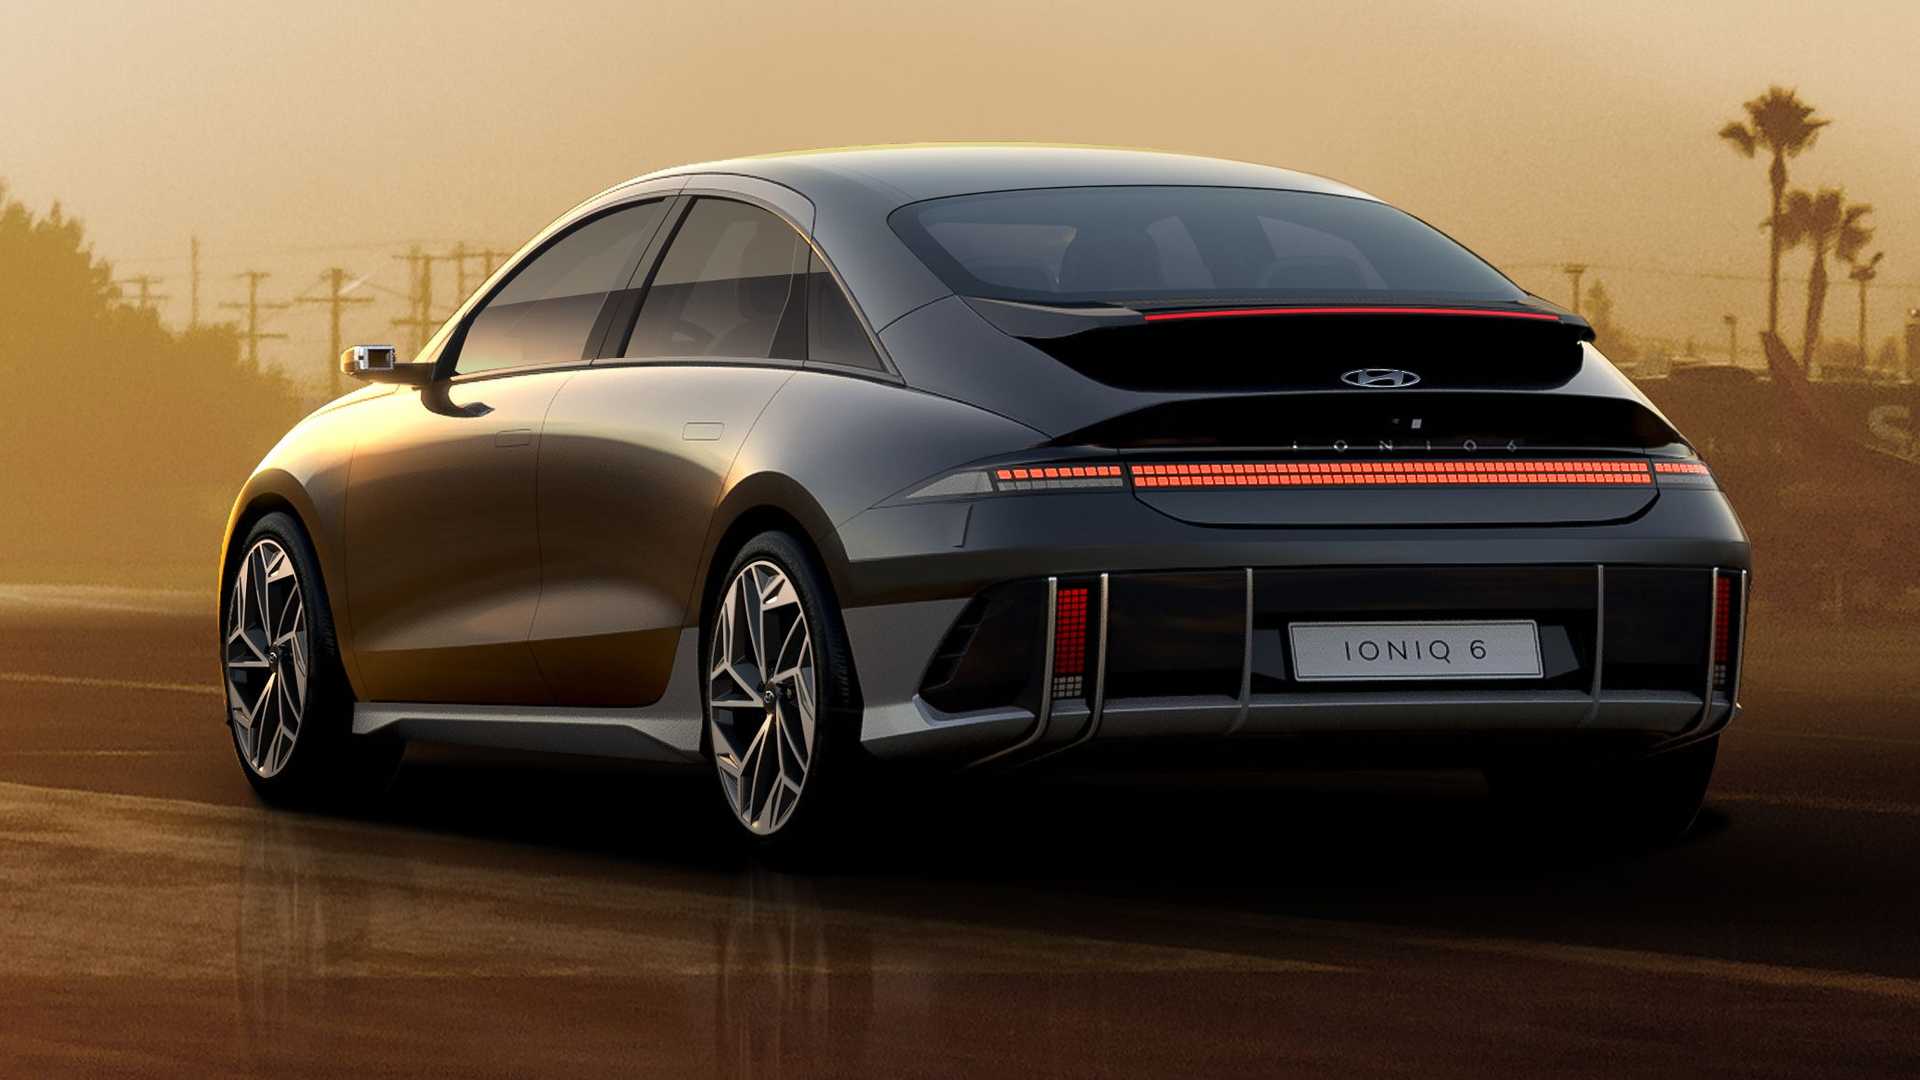 Today, we are covering the upcoming 2024 Hyundai Ioniq 6, as well as answering the questions "Will there be a 2022 Hyundai Ioniq?" and "How long does a Hyundai Ioniq battery last?"